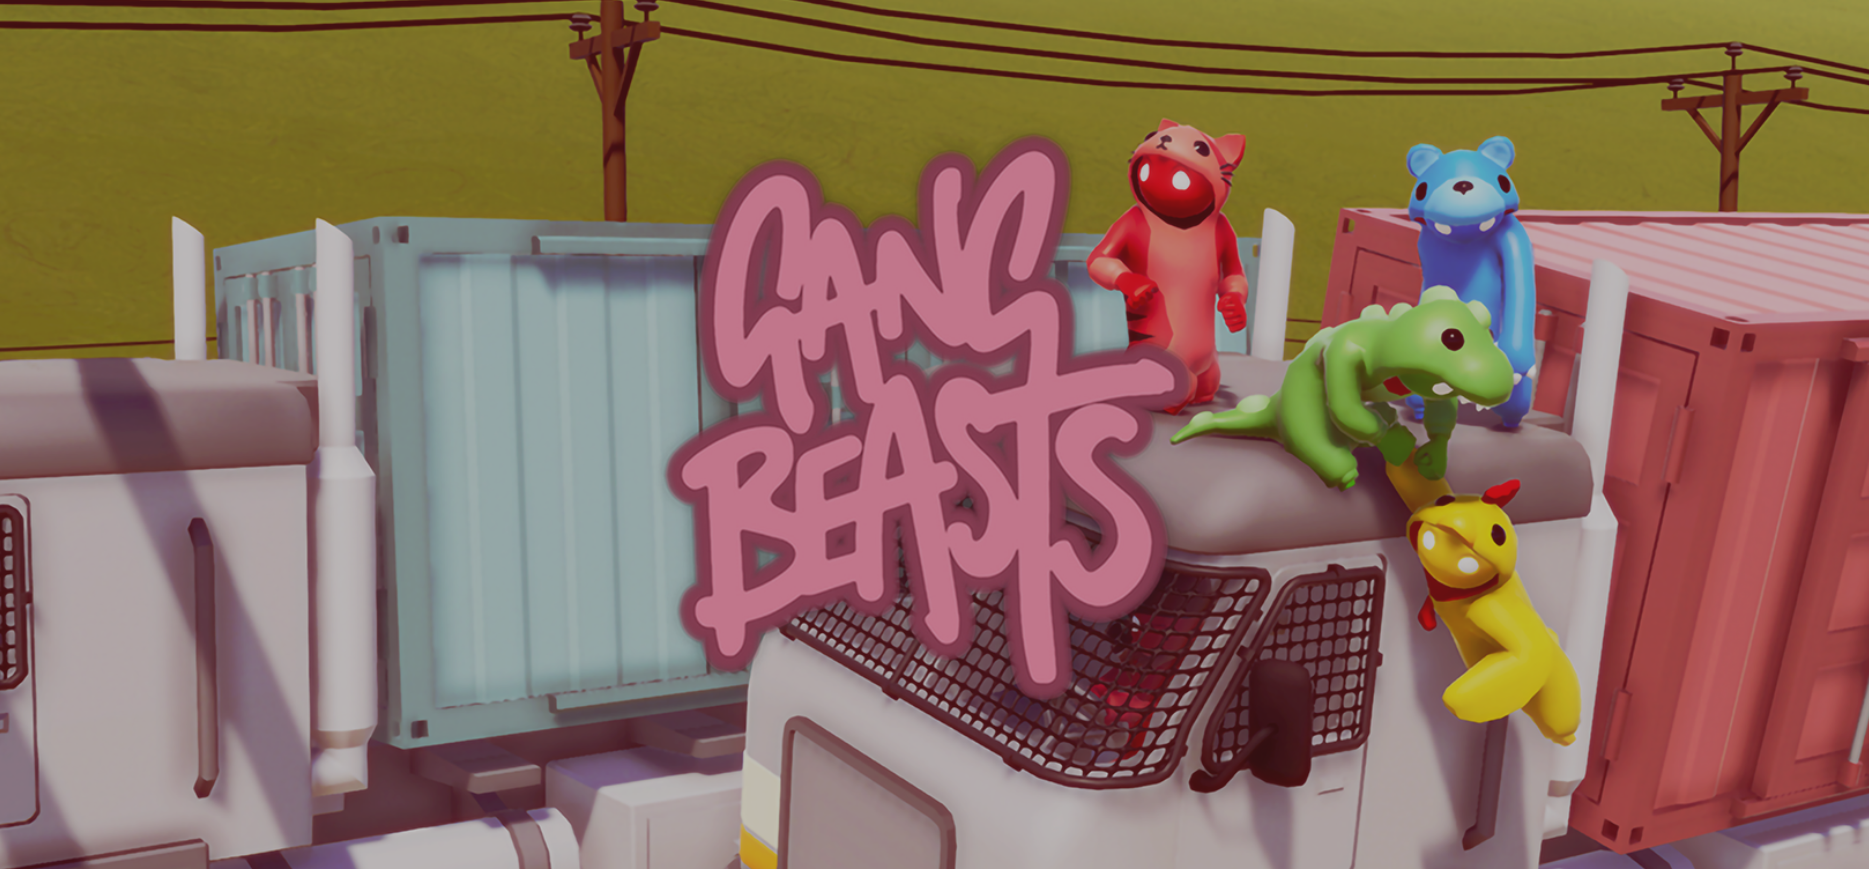 Is Gang Beasts Cross Platform? Know Everything